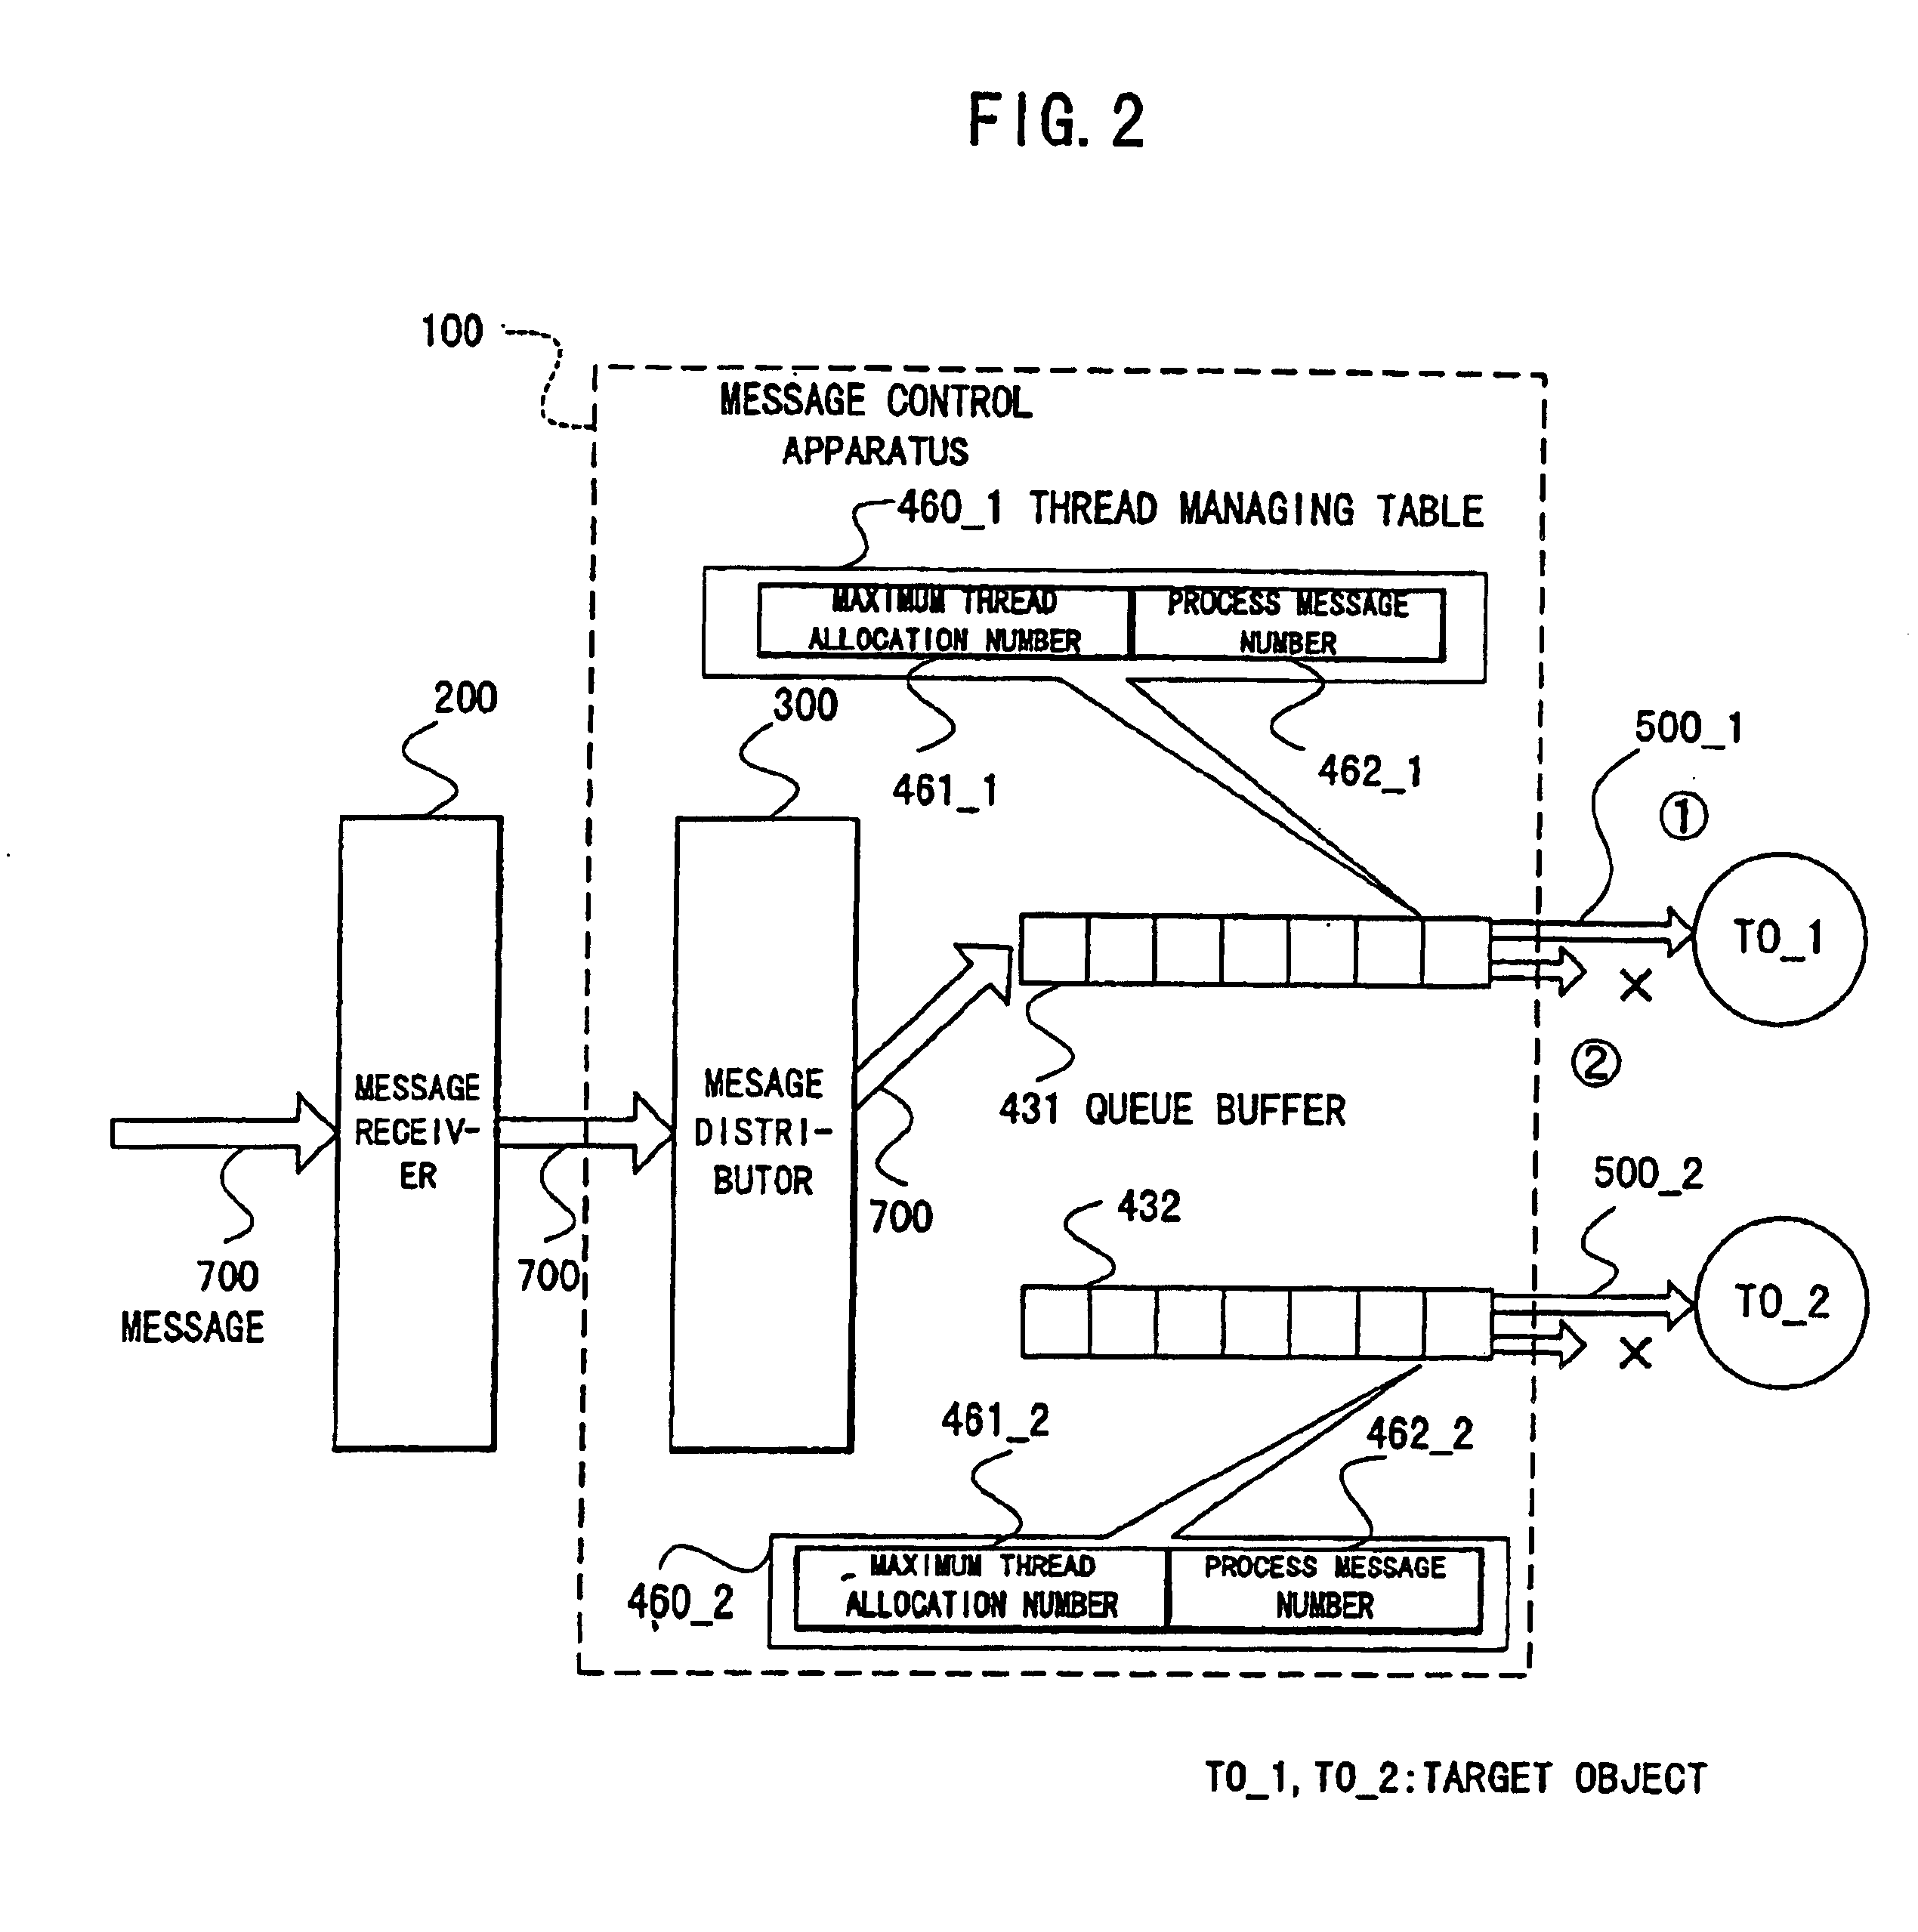 System for controlling message transfer between objects having a controller that assumes standby state and without taking out excess messages from a queue